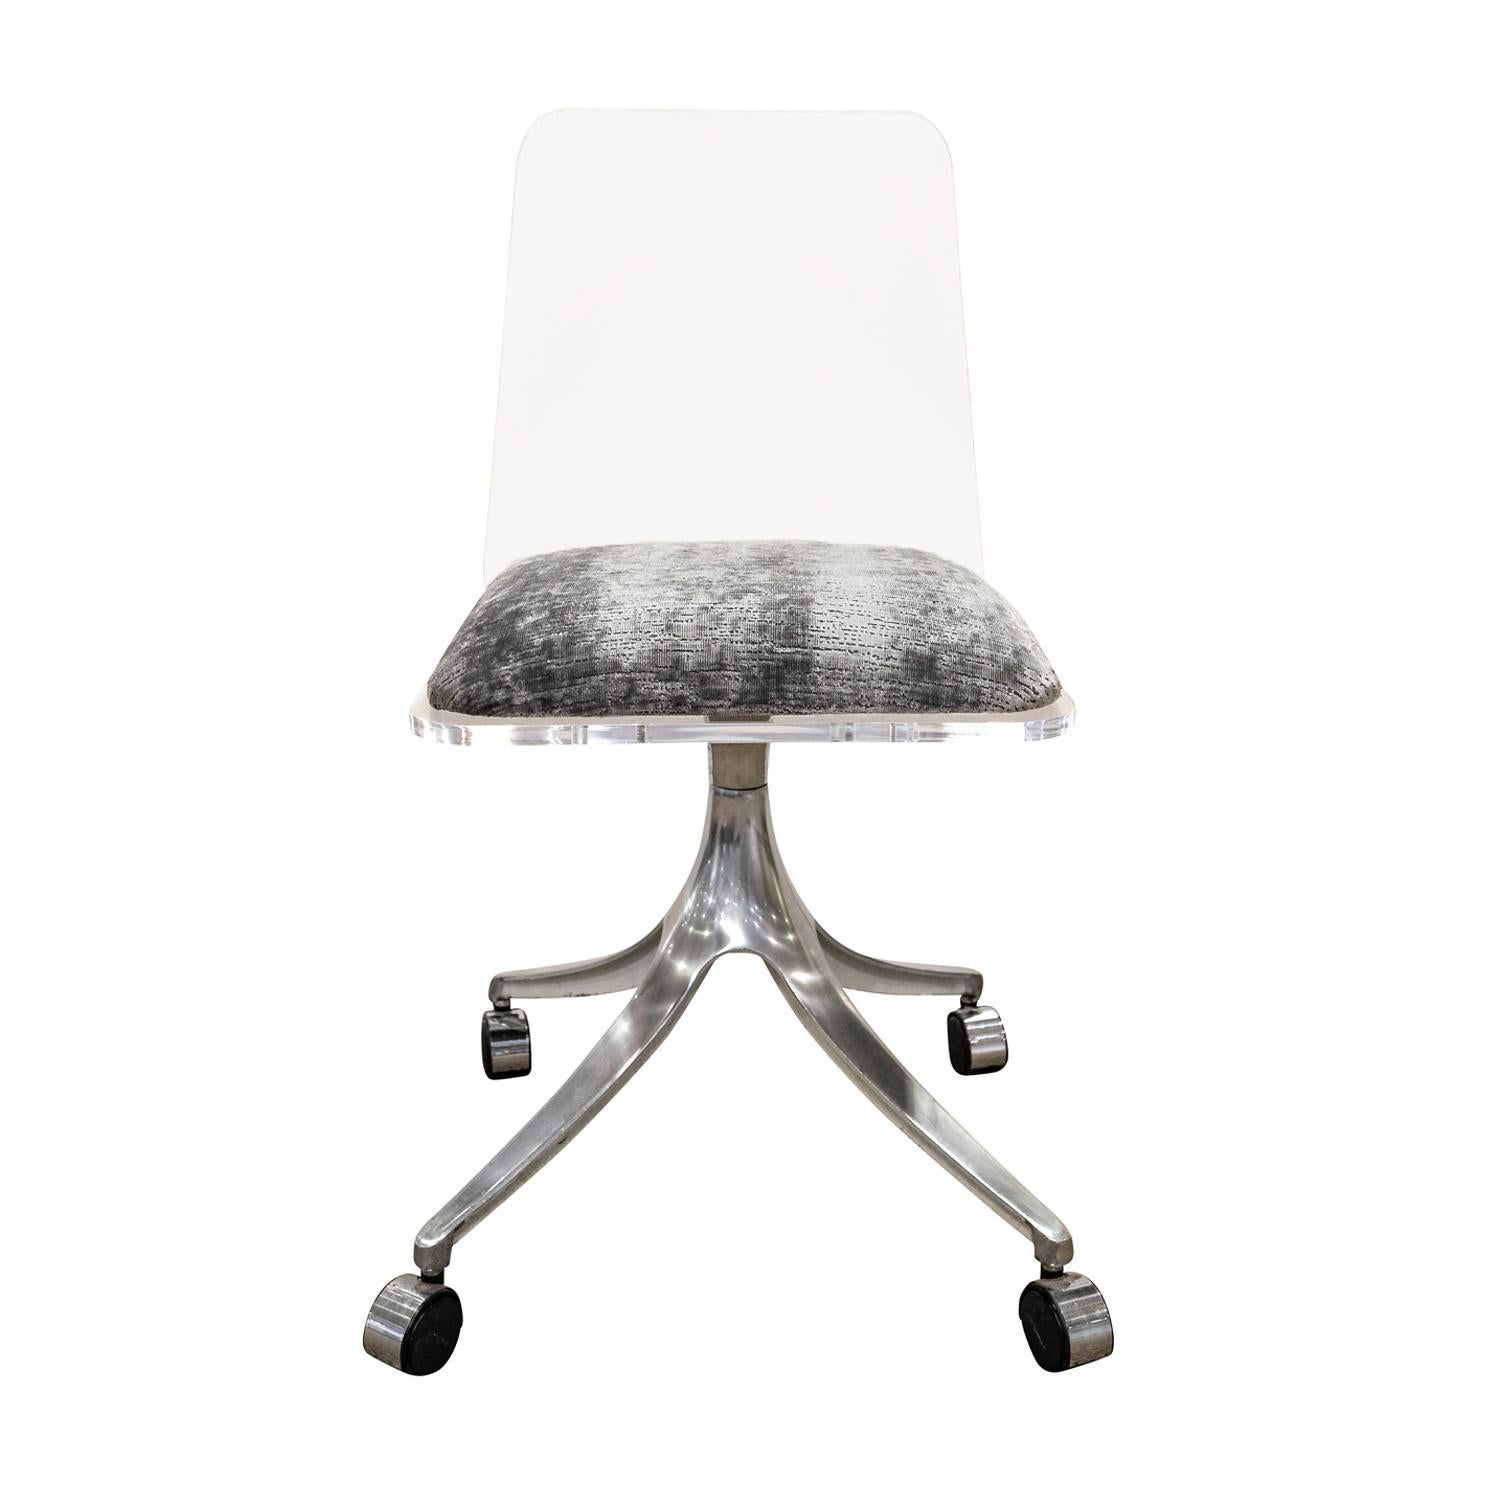 Rolling desk chair with in lucite with newly upholstered seat and sculptural aluminum base, American 1970's.  Seat has been newly upholstered in a beautiful textured gray velvet.  Lucite has been cleaned and polished.  This chair is both comfortable